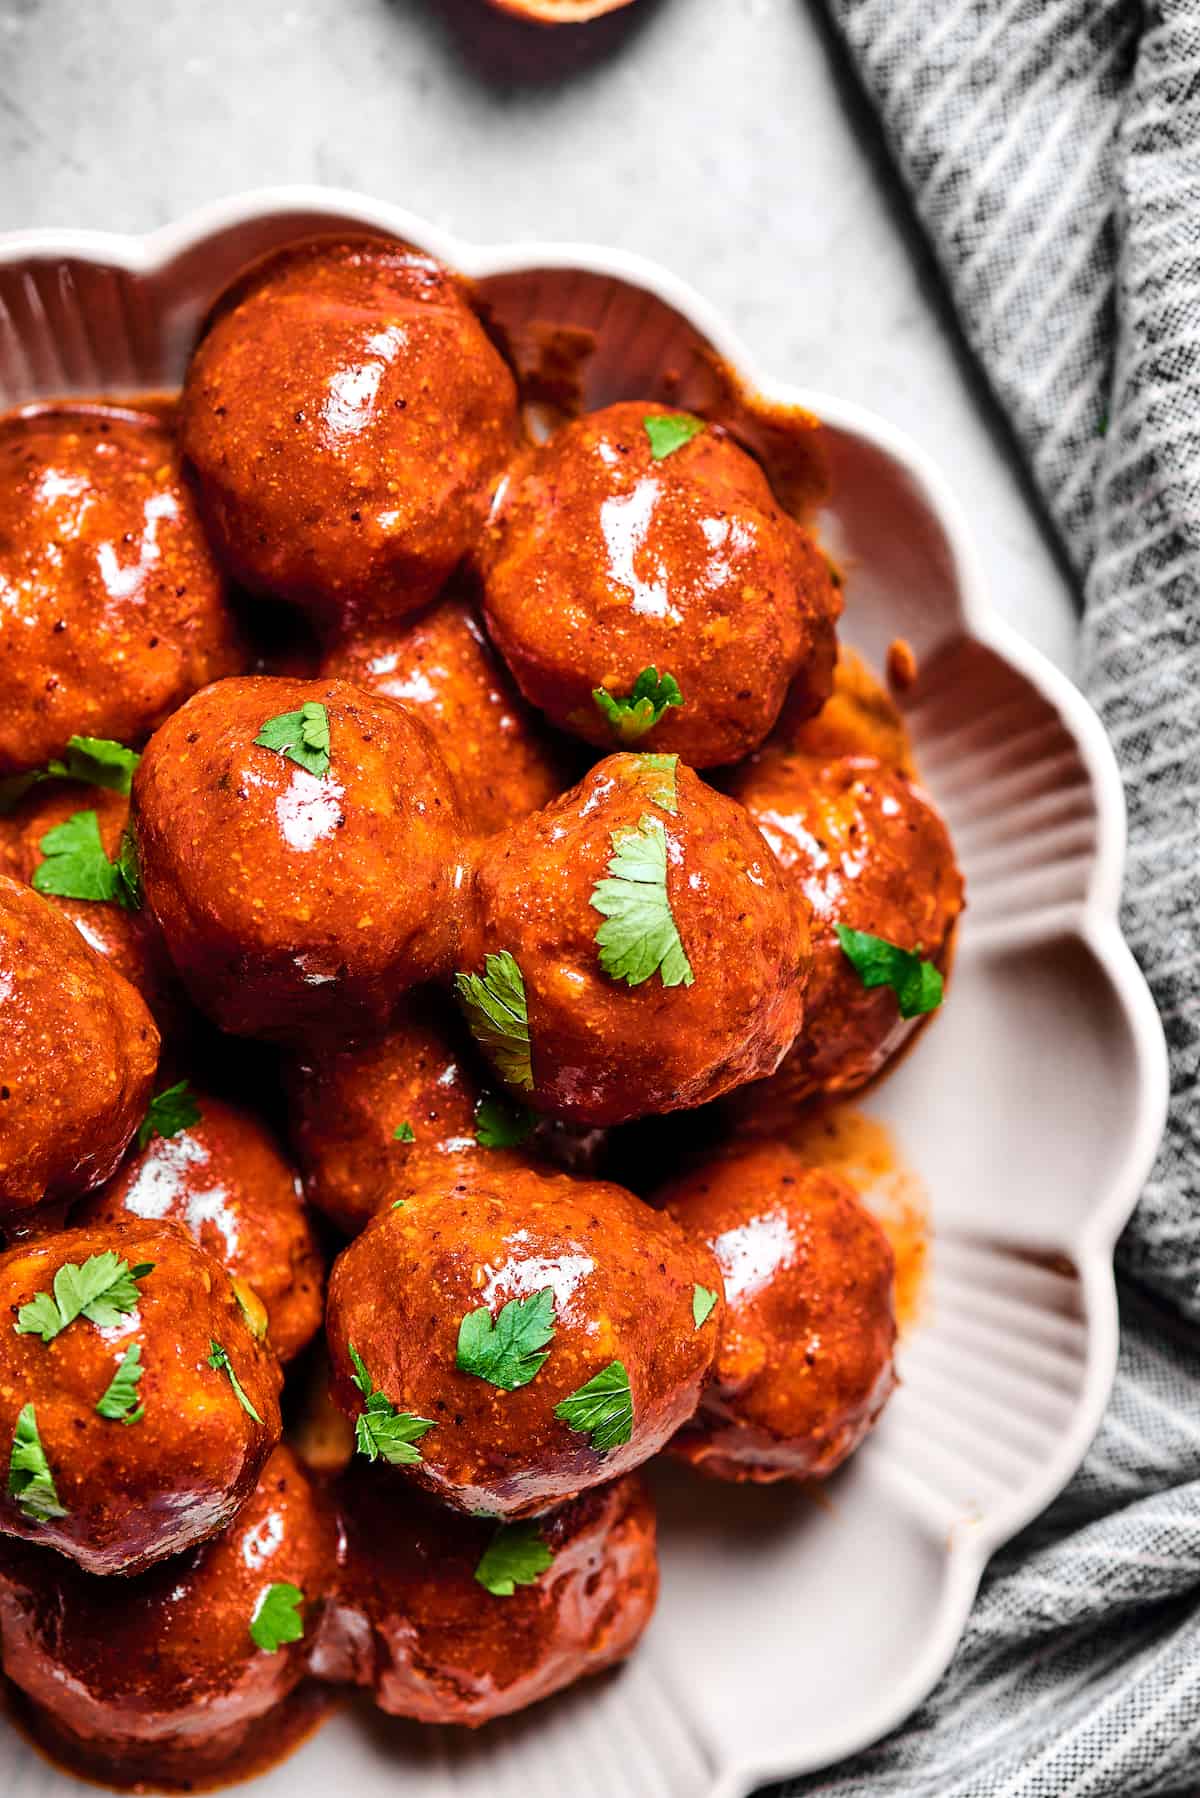 Saucy meatballs on a platter sprinkled with parsley.